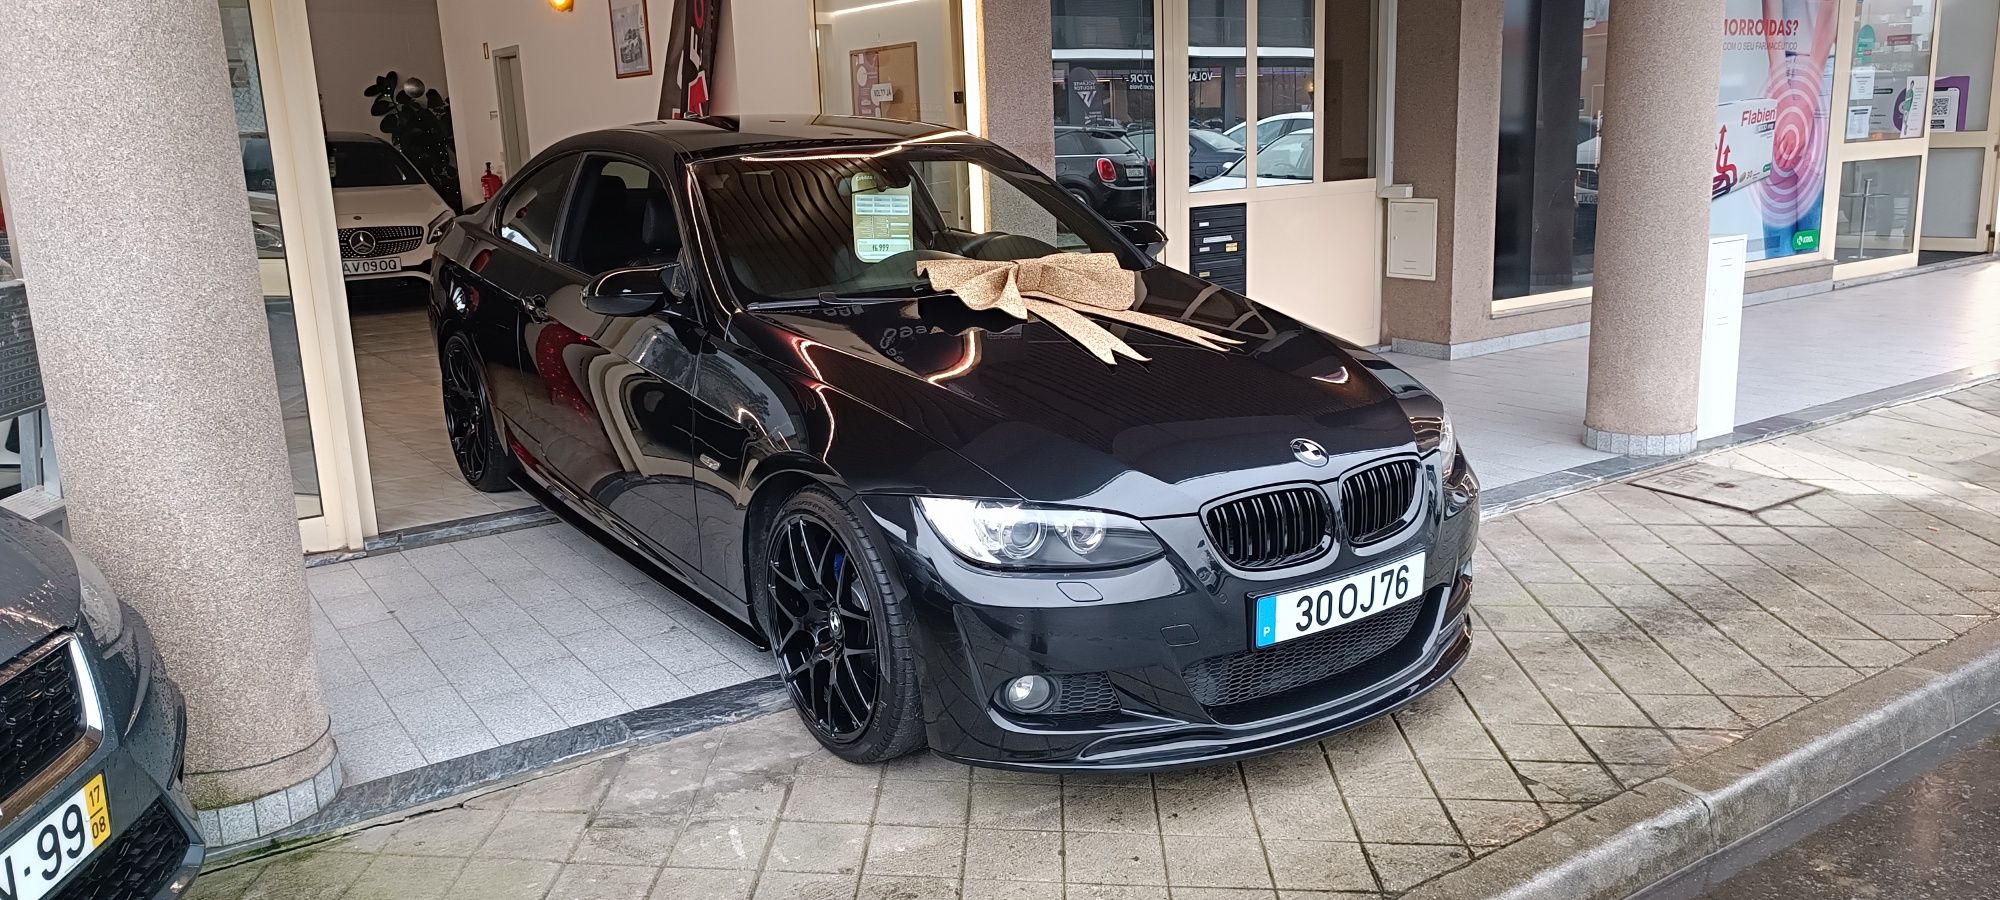 BMW 320D coupé Pack M full extras